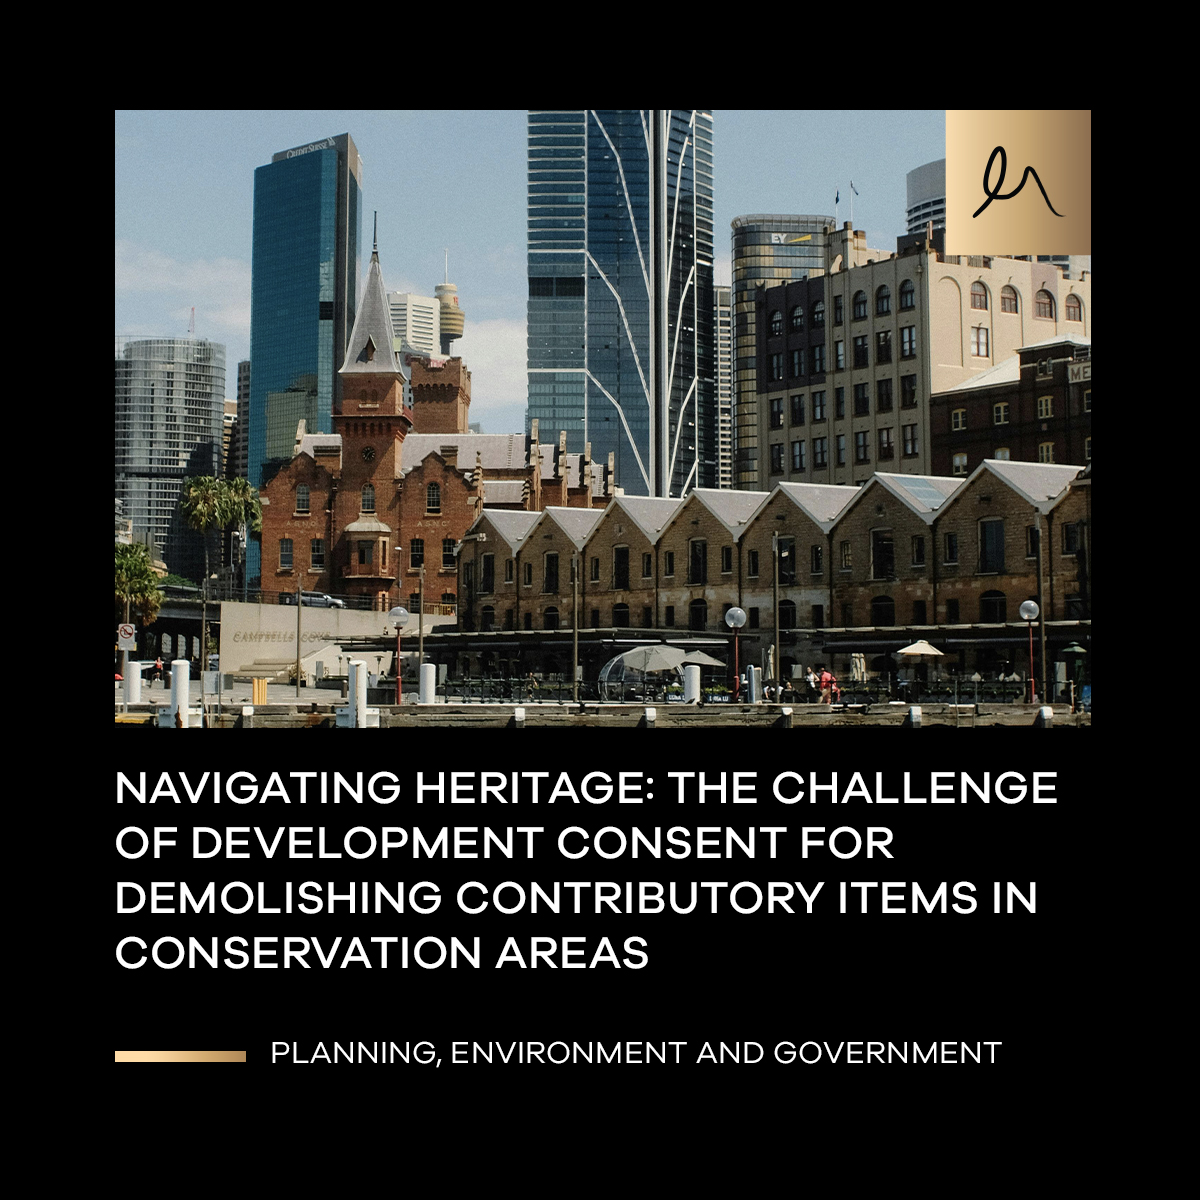 Balancing development with heritage preservation just got more complex! Read about the NSW Land and Environment Court's recent ruling on demolishing heritage sites in conservation areas. 

🔗 l8r.it/jTBn

#HeritageConservation #UrbanPlanning #NSWLaw